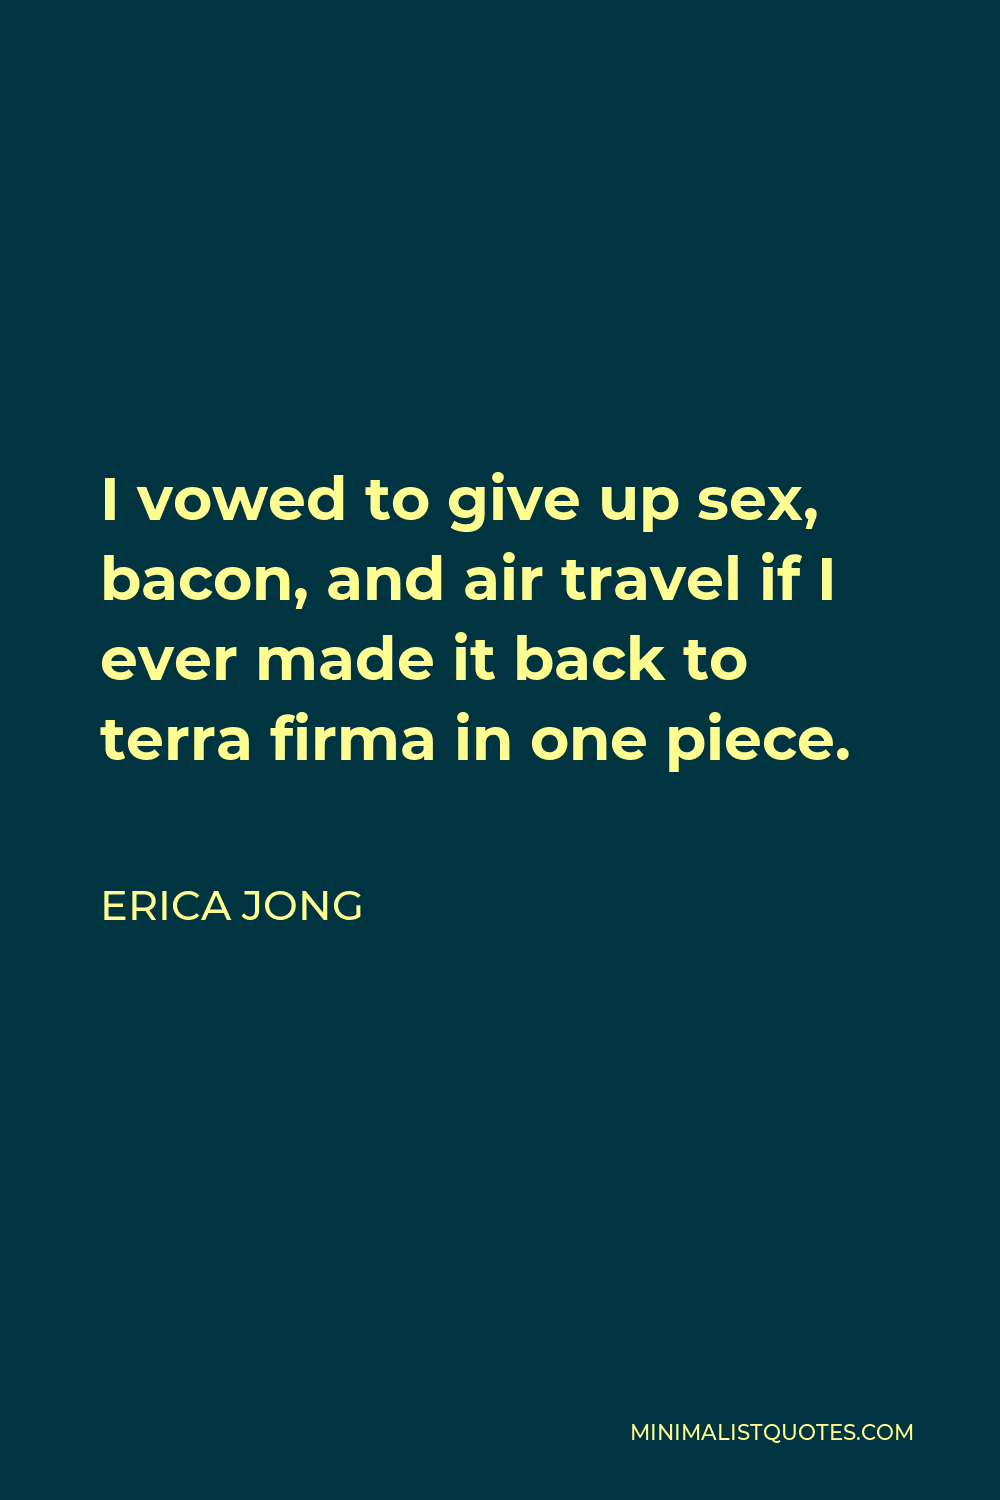 Erica Jong Quote - I vowed to give up sex, bacon, and air travel if I ever made it back to terra firma in one piece.